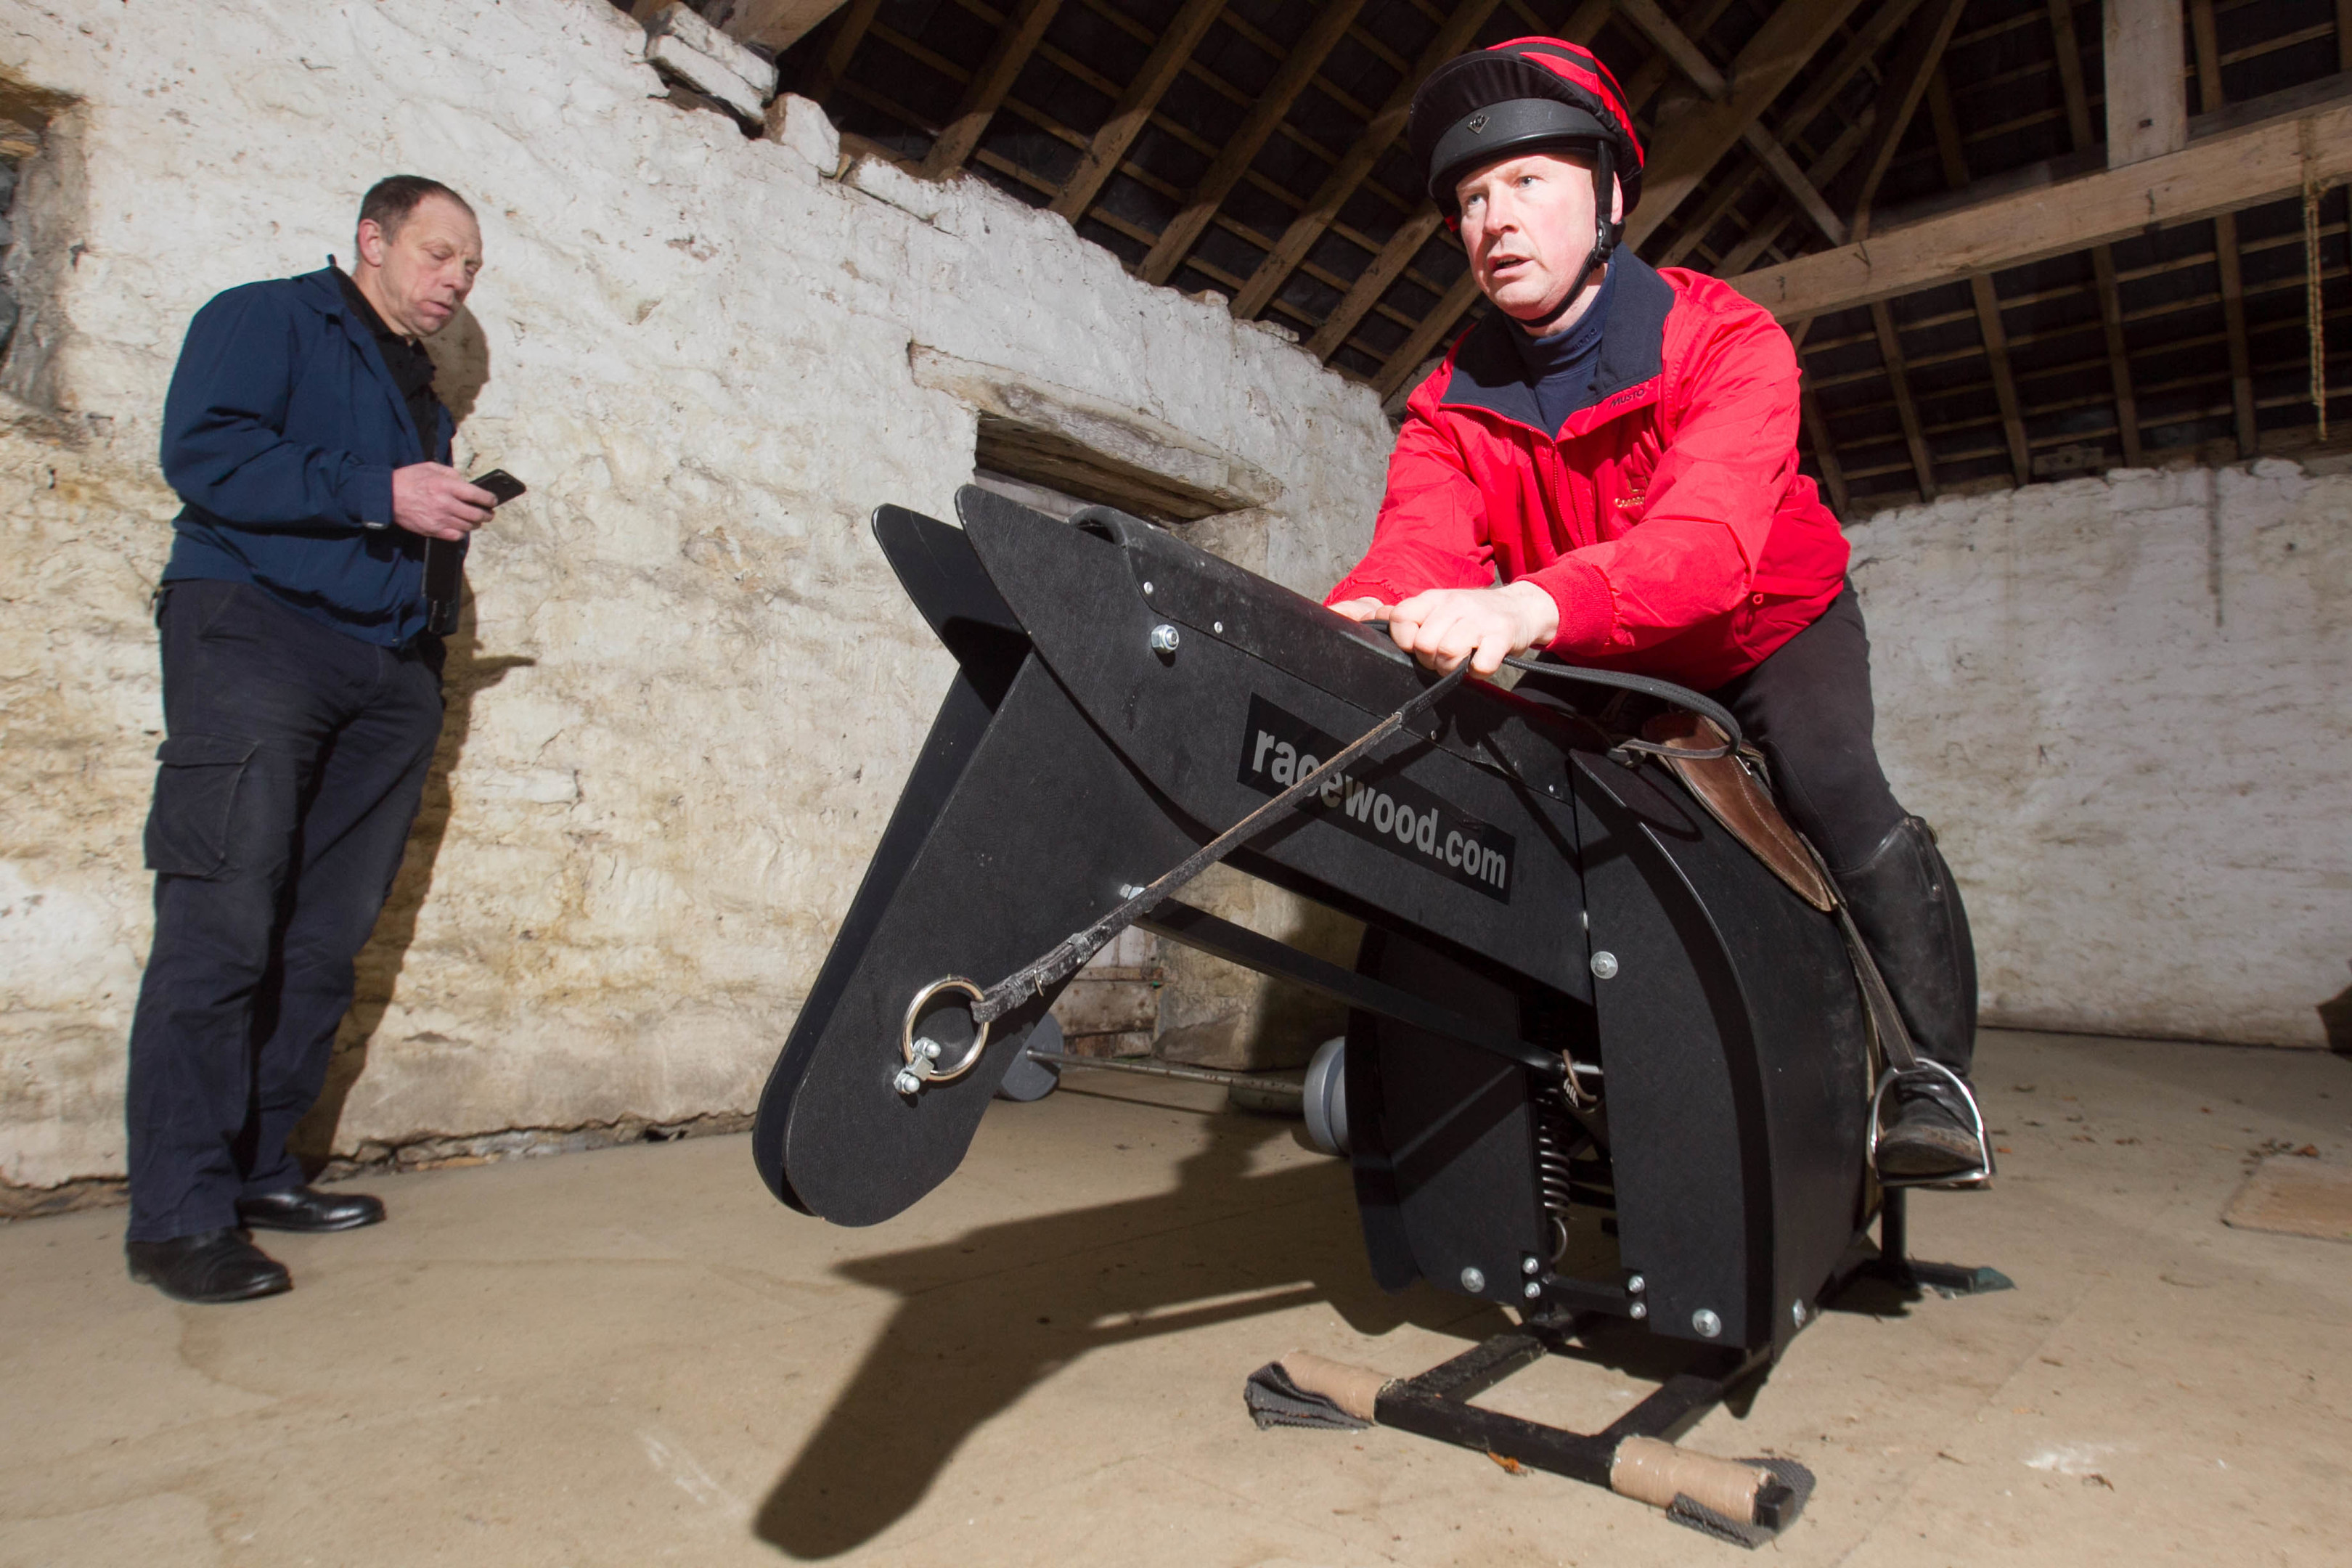 Scott on the mechanical training horse with Tim the trainer. (Sunday Post)